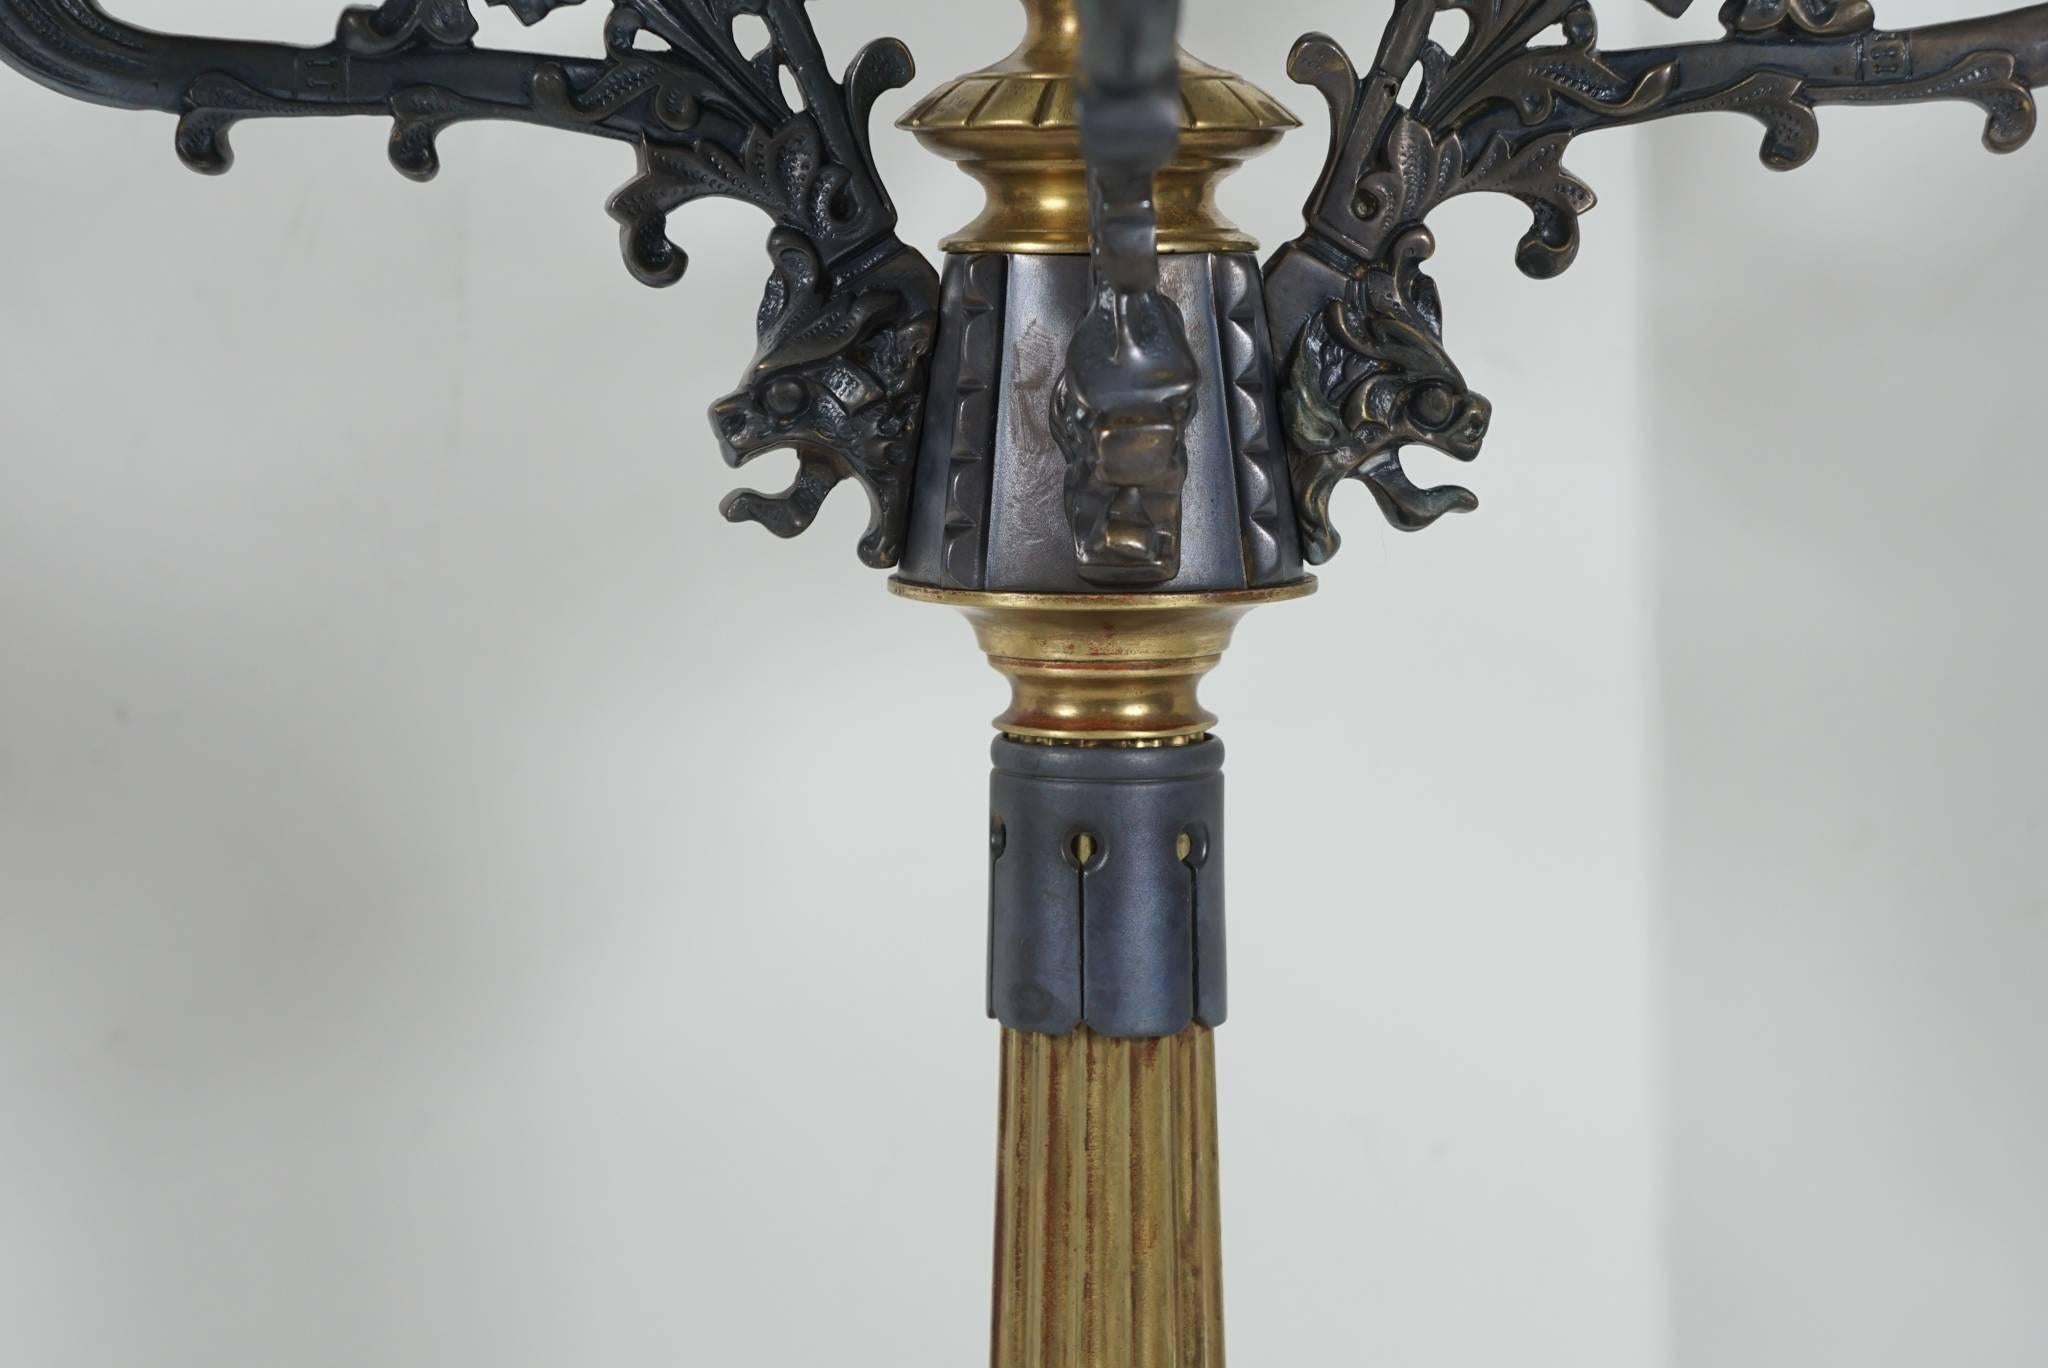 Pair of Patinated and Polished Bronze Renaissance Revival Candelabra For Sale 2